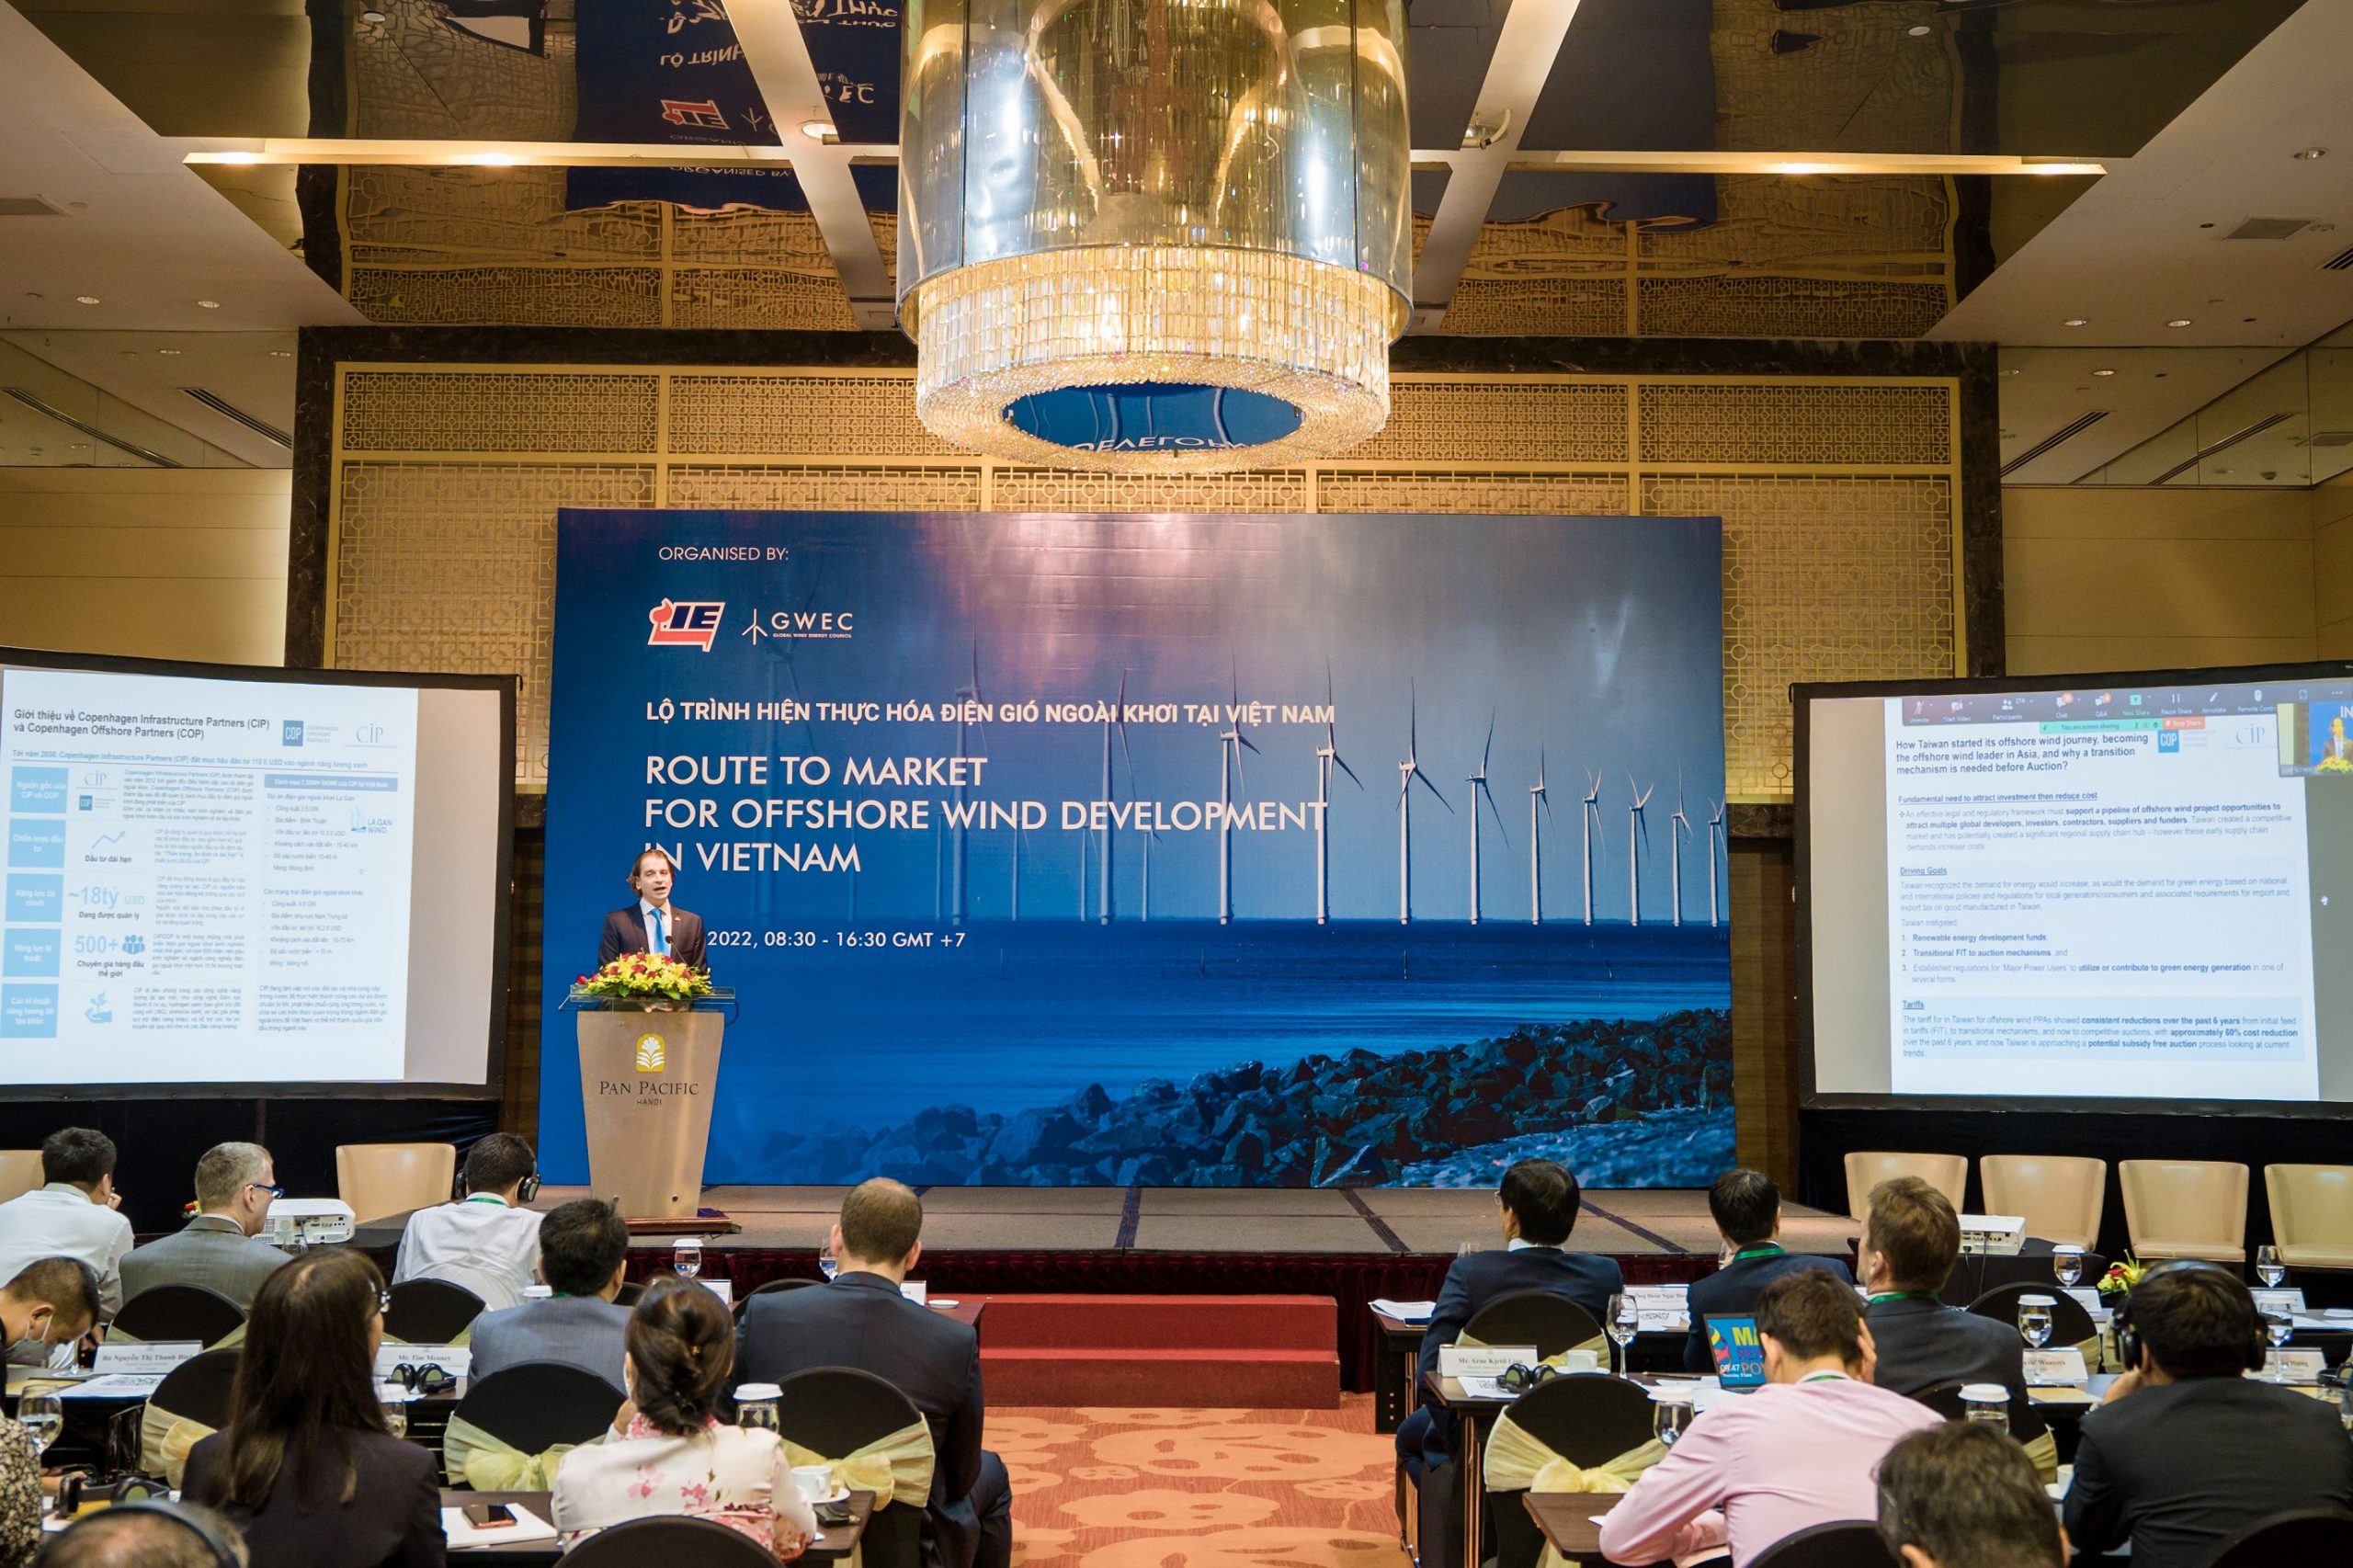 CEO of La Gan Wind presented at workshop “Route to Market for Offshore Wind Development in Vietnam”